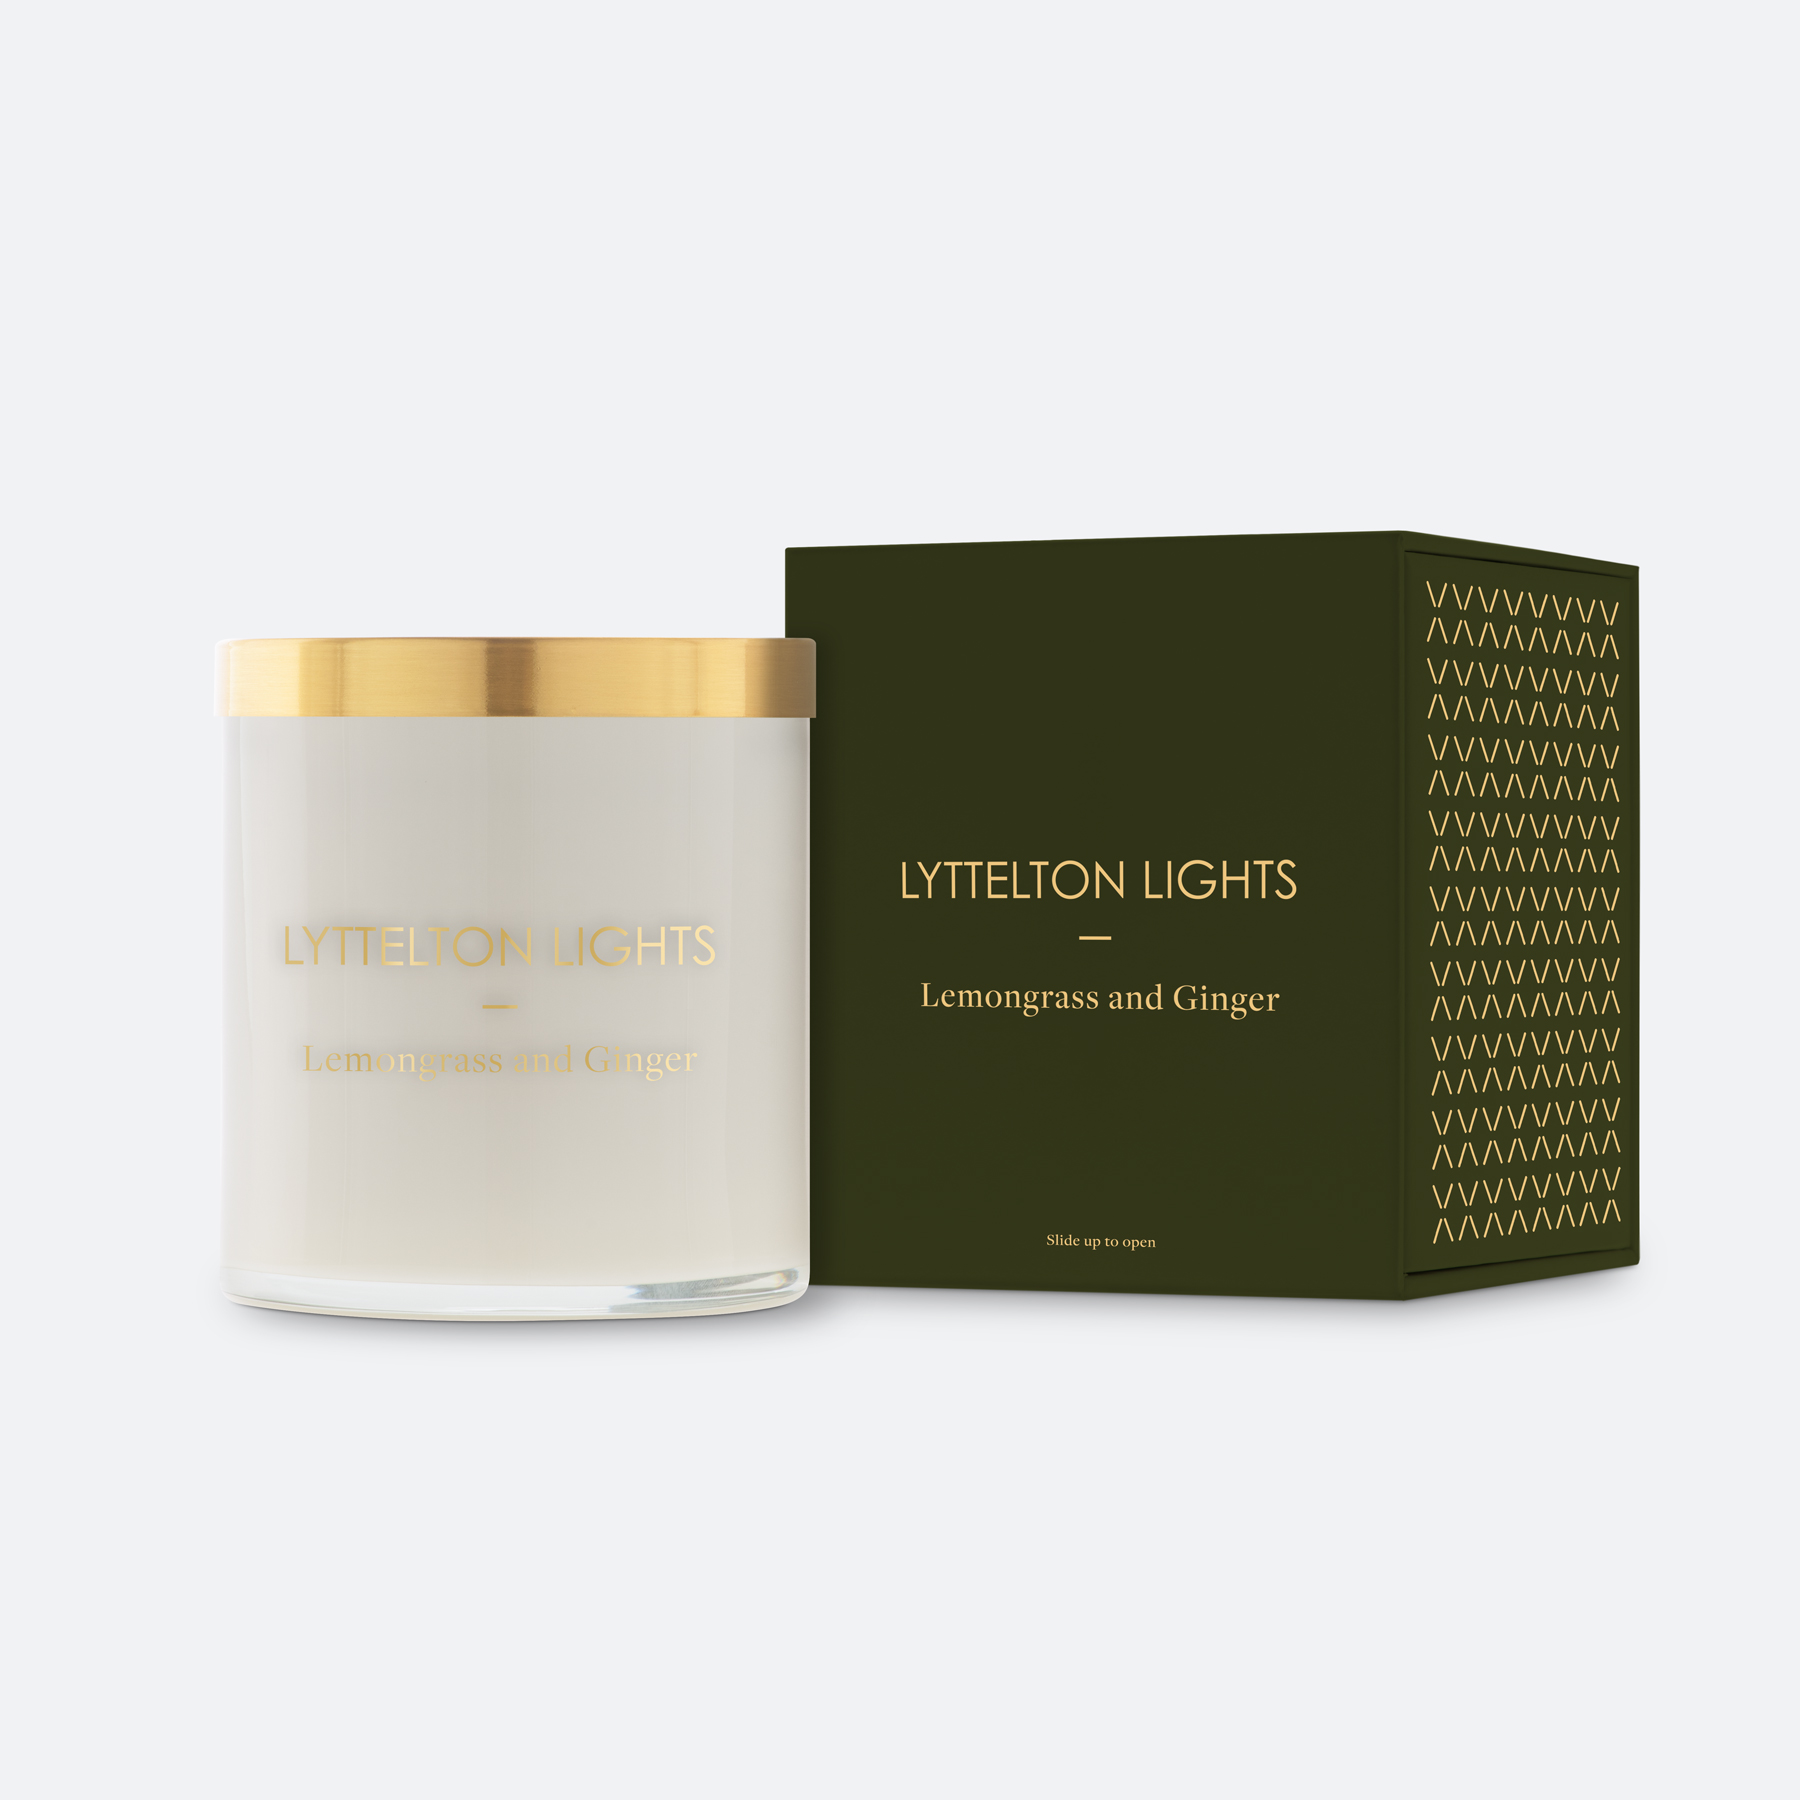 Lyttelton Lights Candle | Corporate Gifts NZ | Withers & Co.